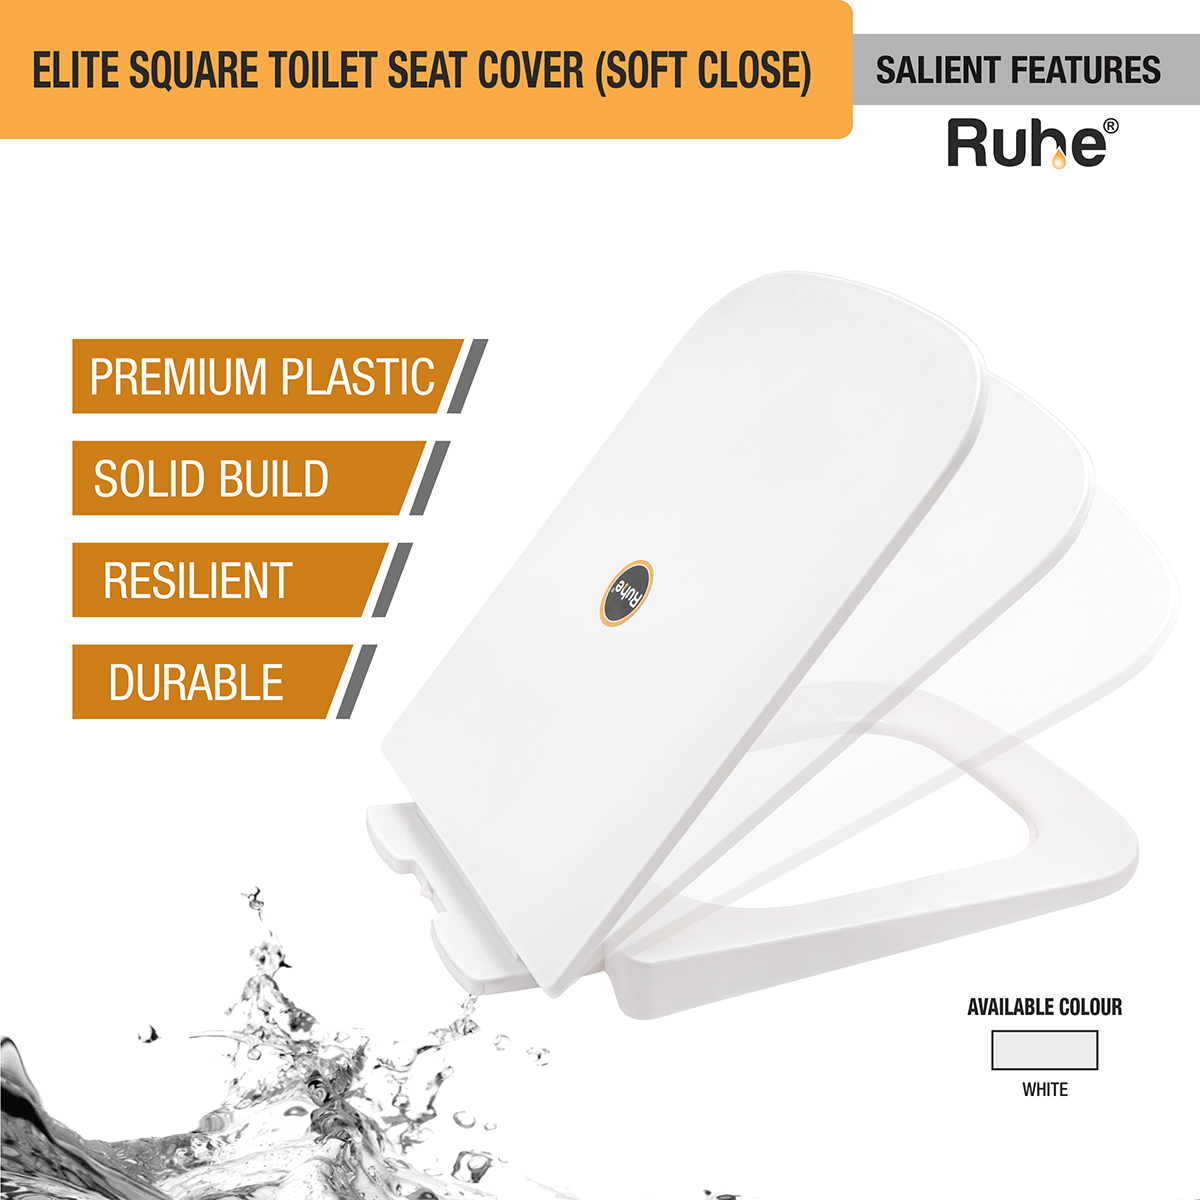 Elite Square Toilet Seat Cover (Soft Close) features and benefits